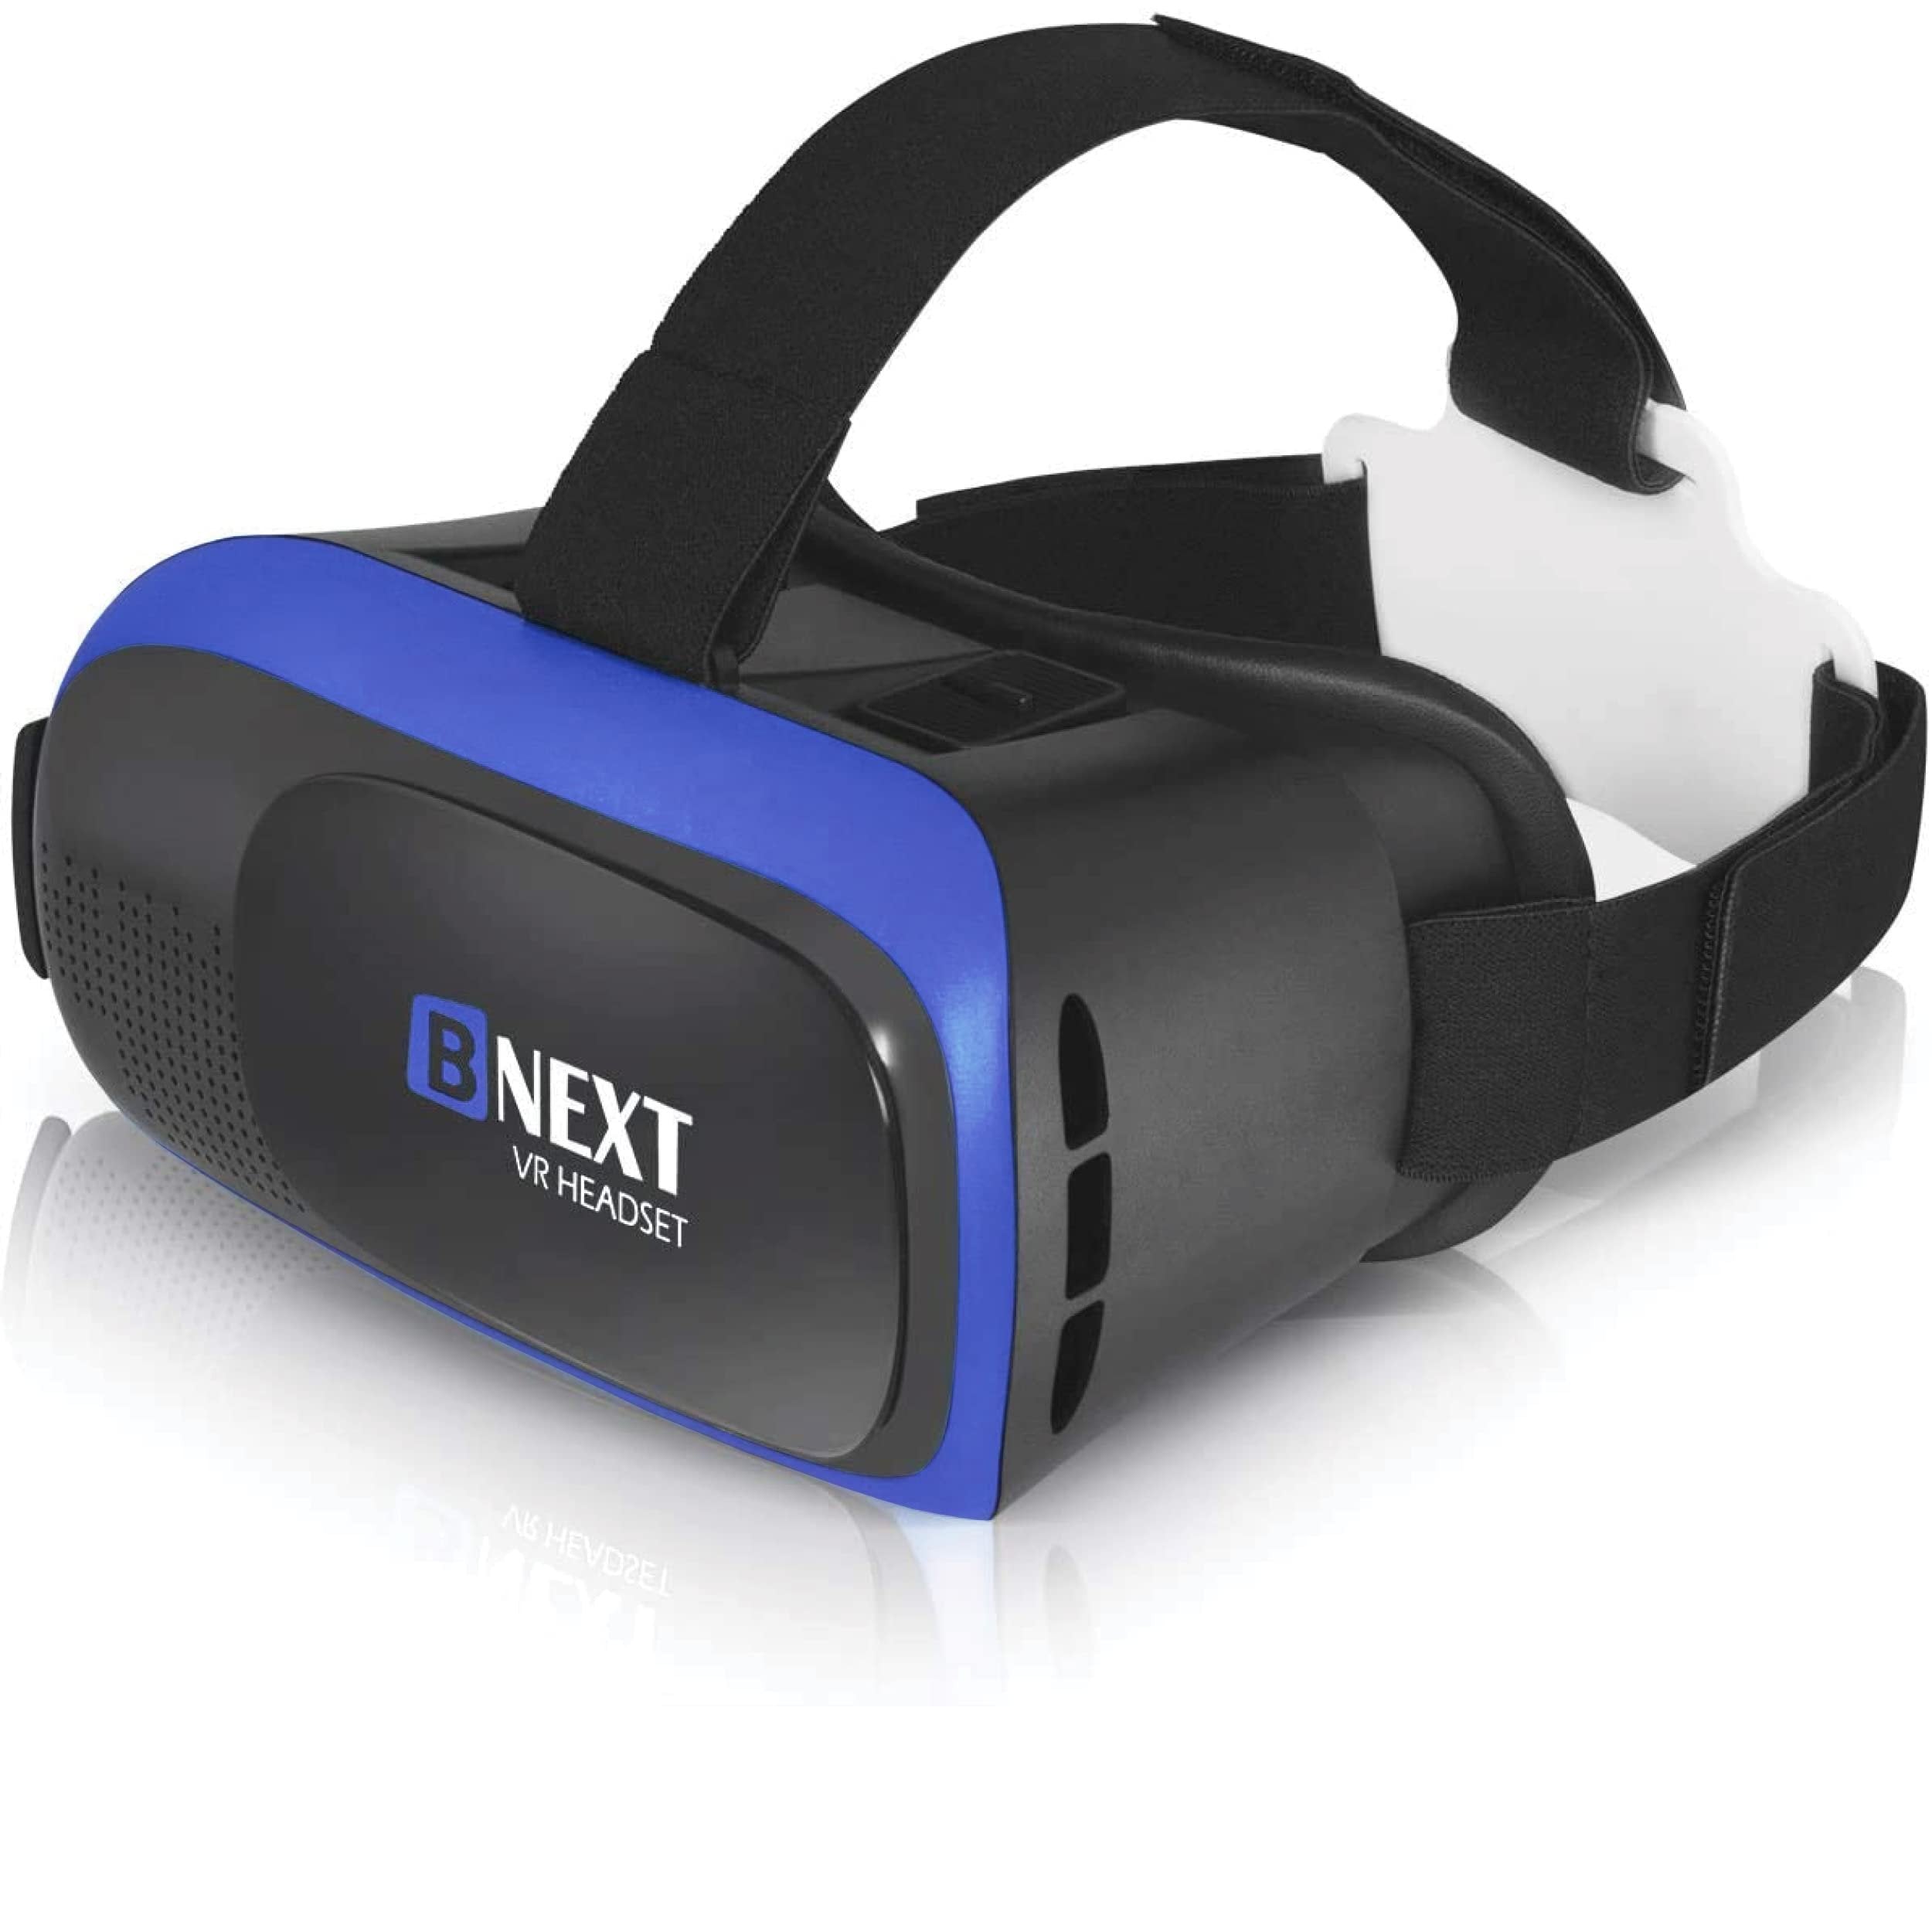 Universal VR Headset for iPhone & Android - Blue - Comfortable 3D Glasses - Free Shipping & Returns